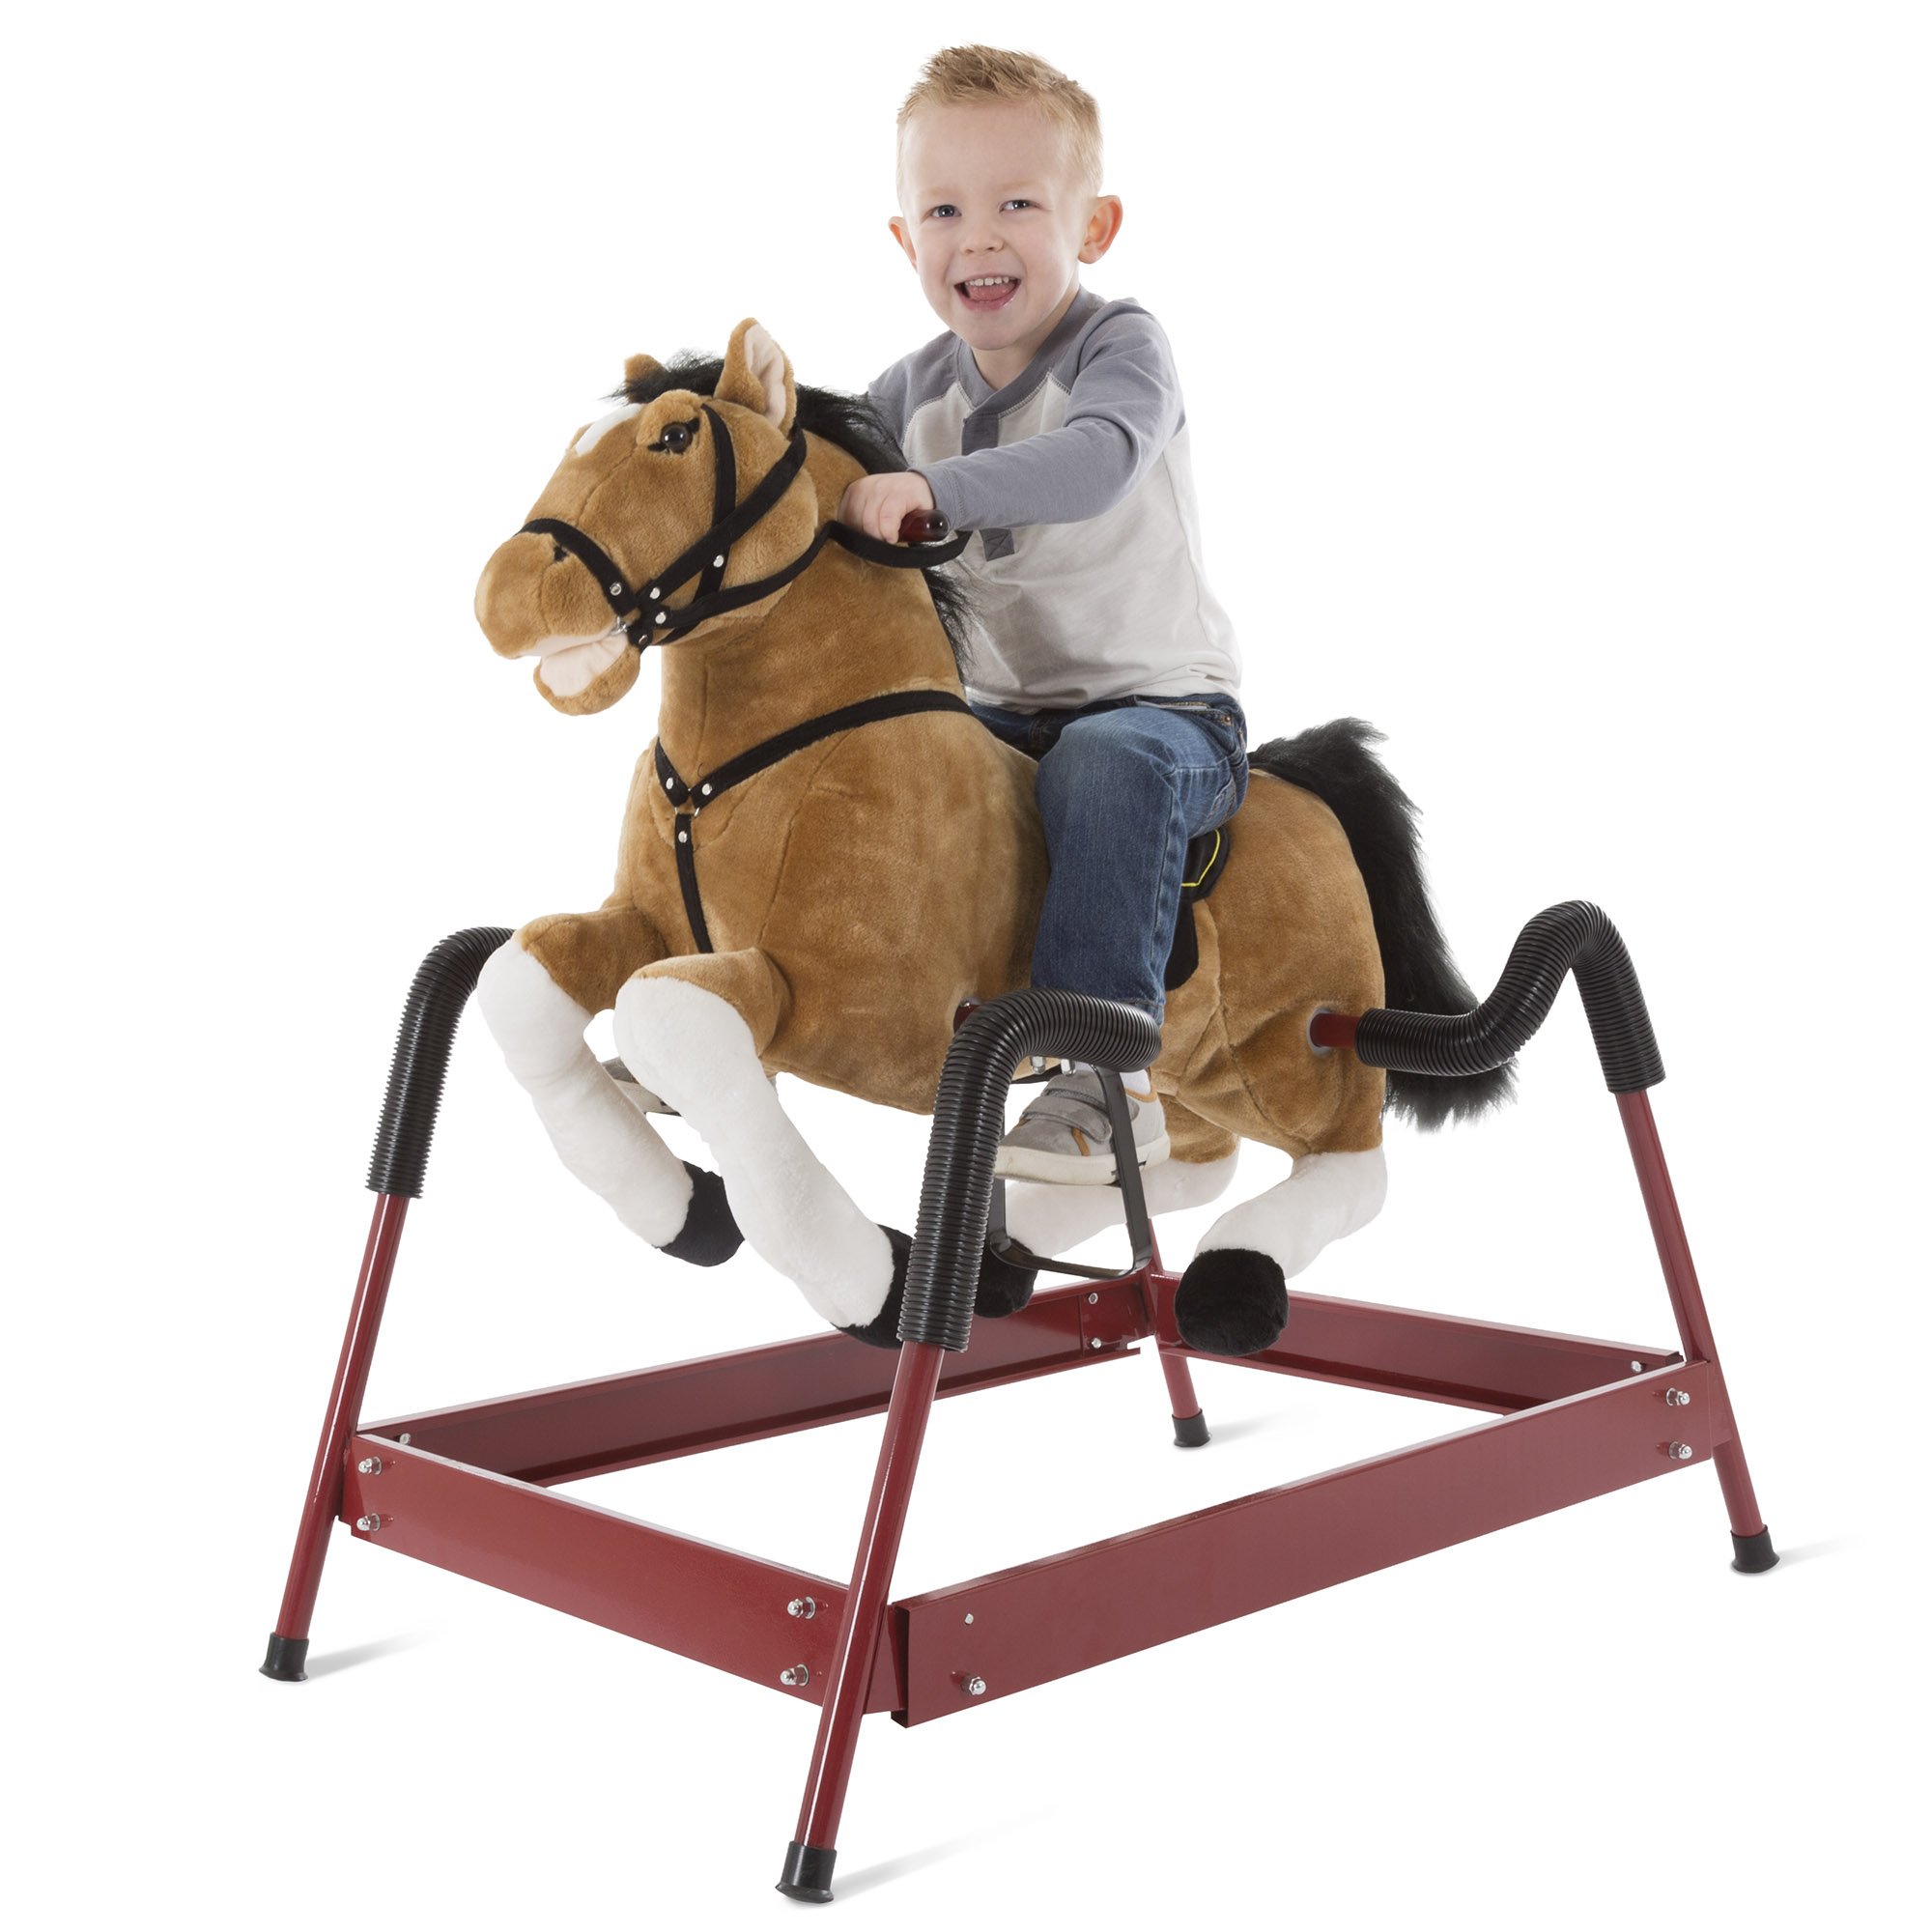 Spring Rocking Horse Plush Ride on Toy with Adjustable Foot Stirrups and Sounds for Toddlers to 5 Years Old by Happy Trails - Brown